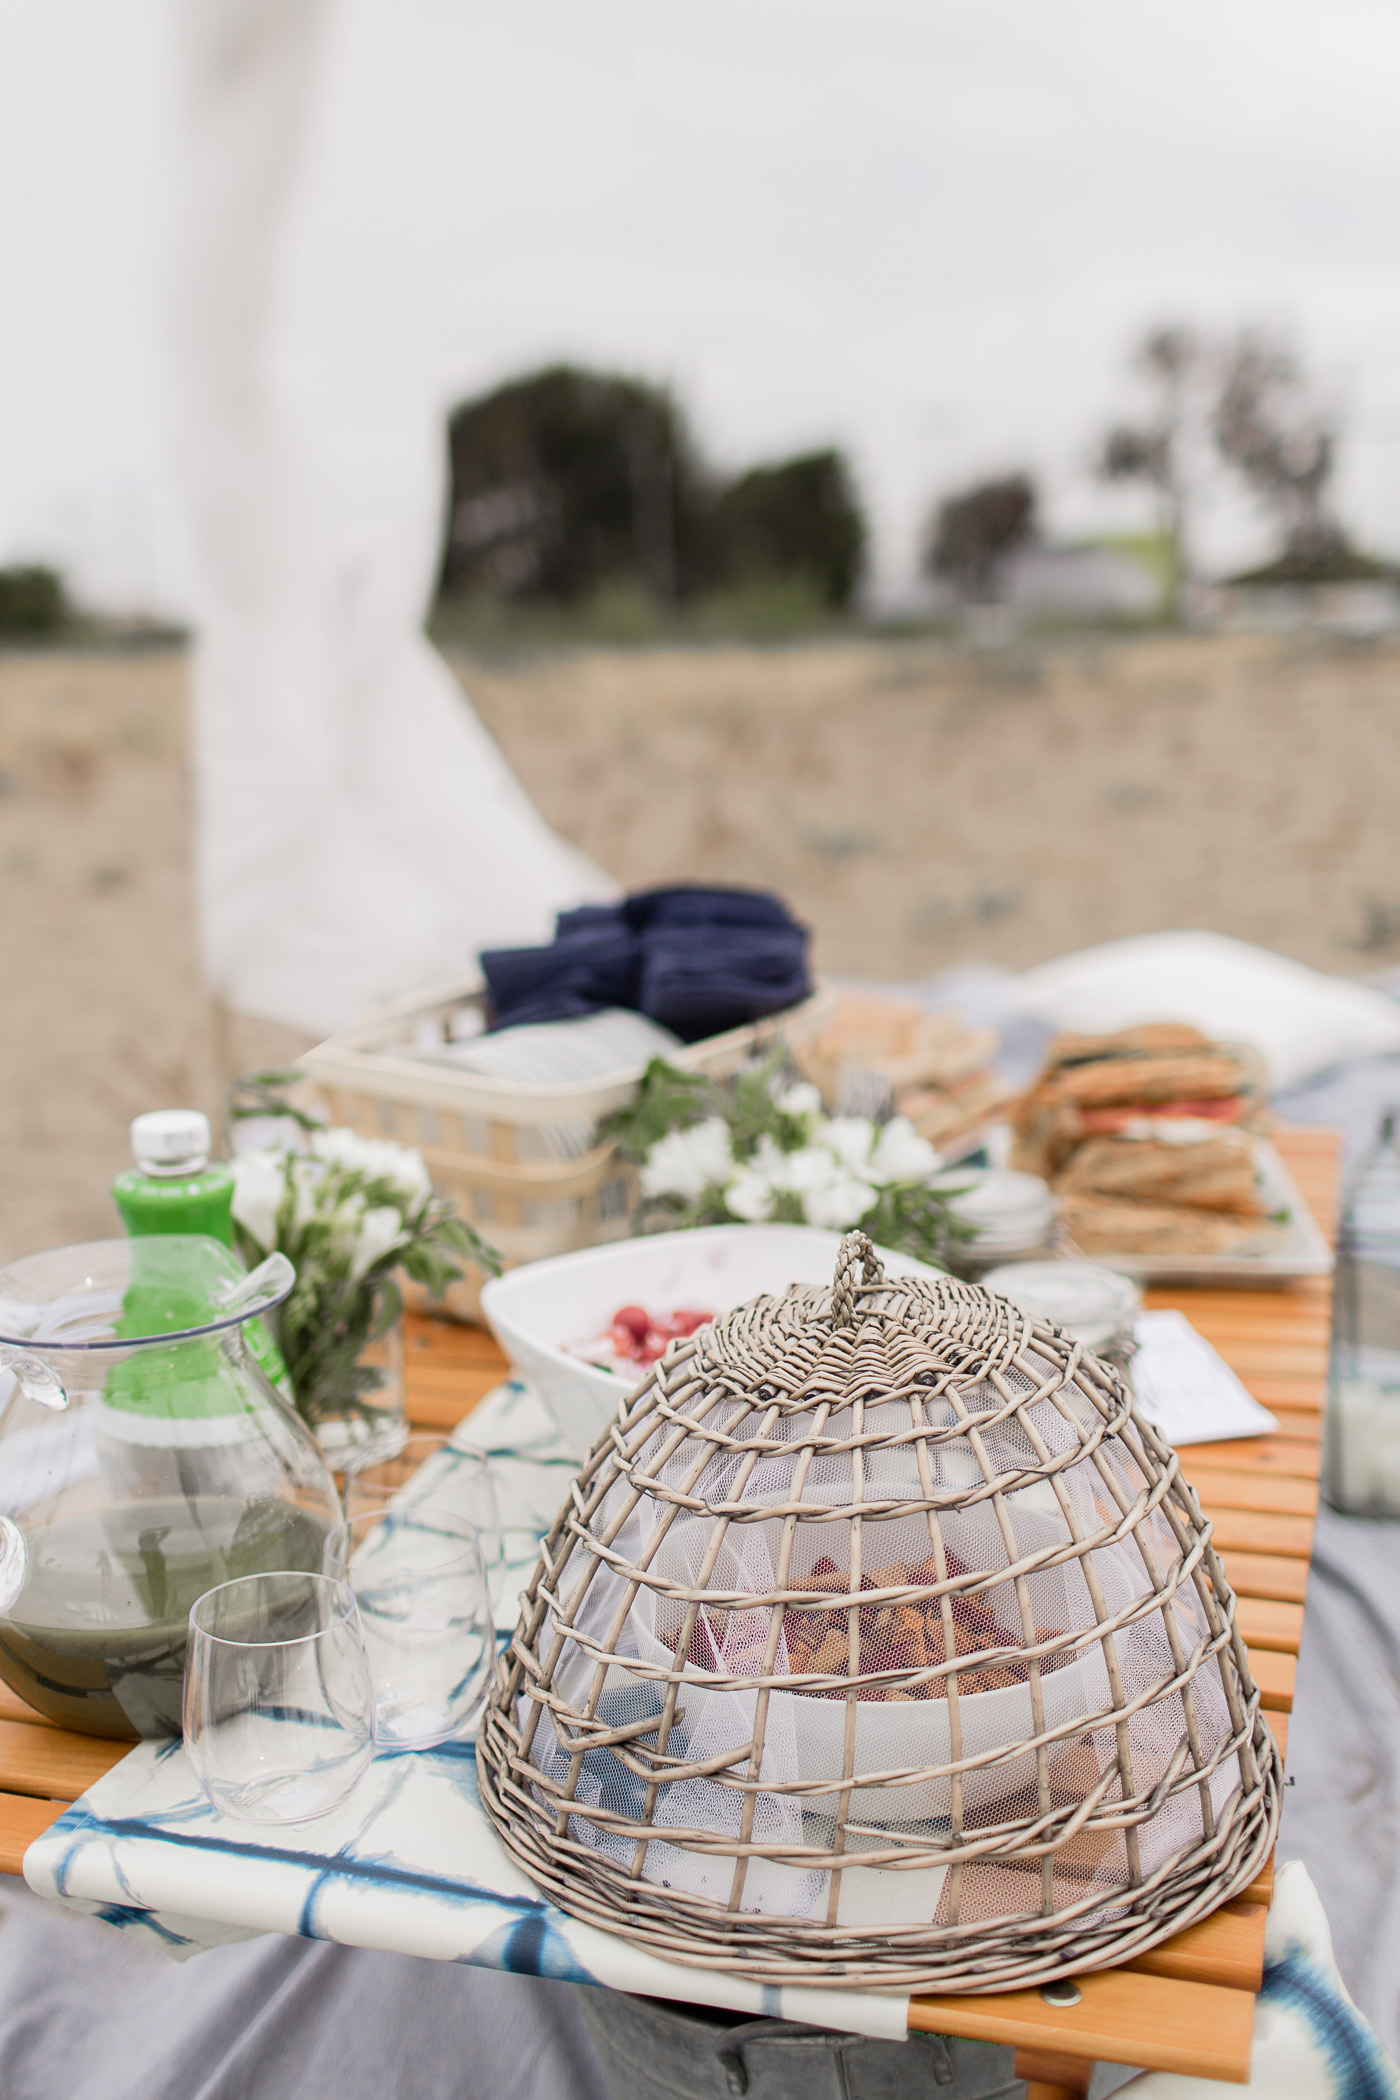 5 tips for throwing the perfect picnic party